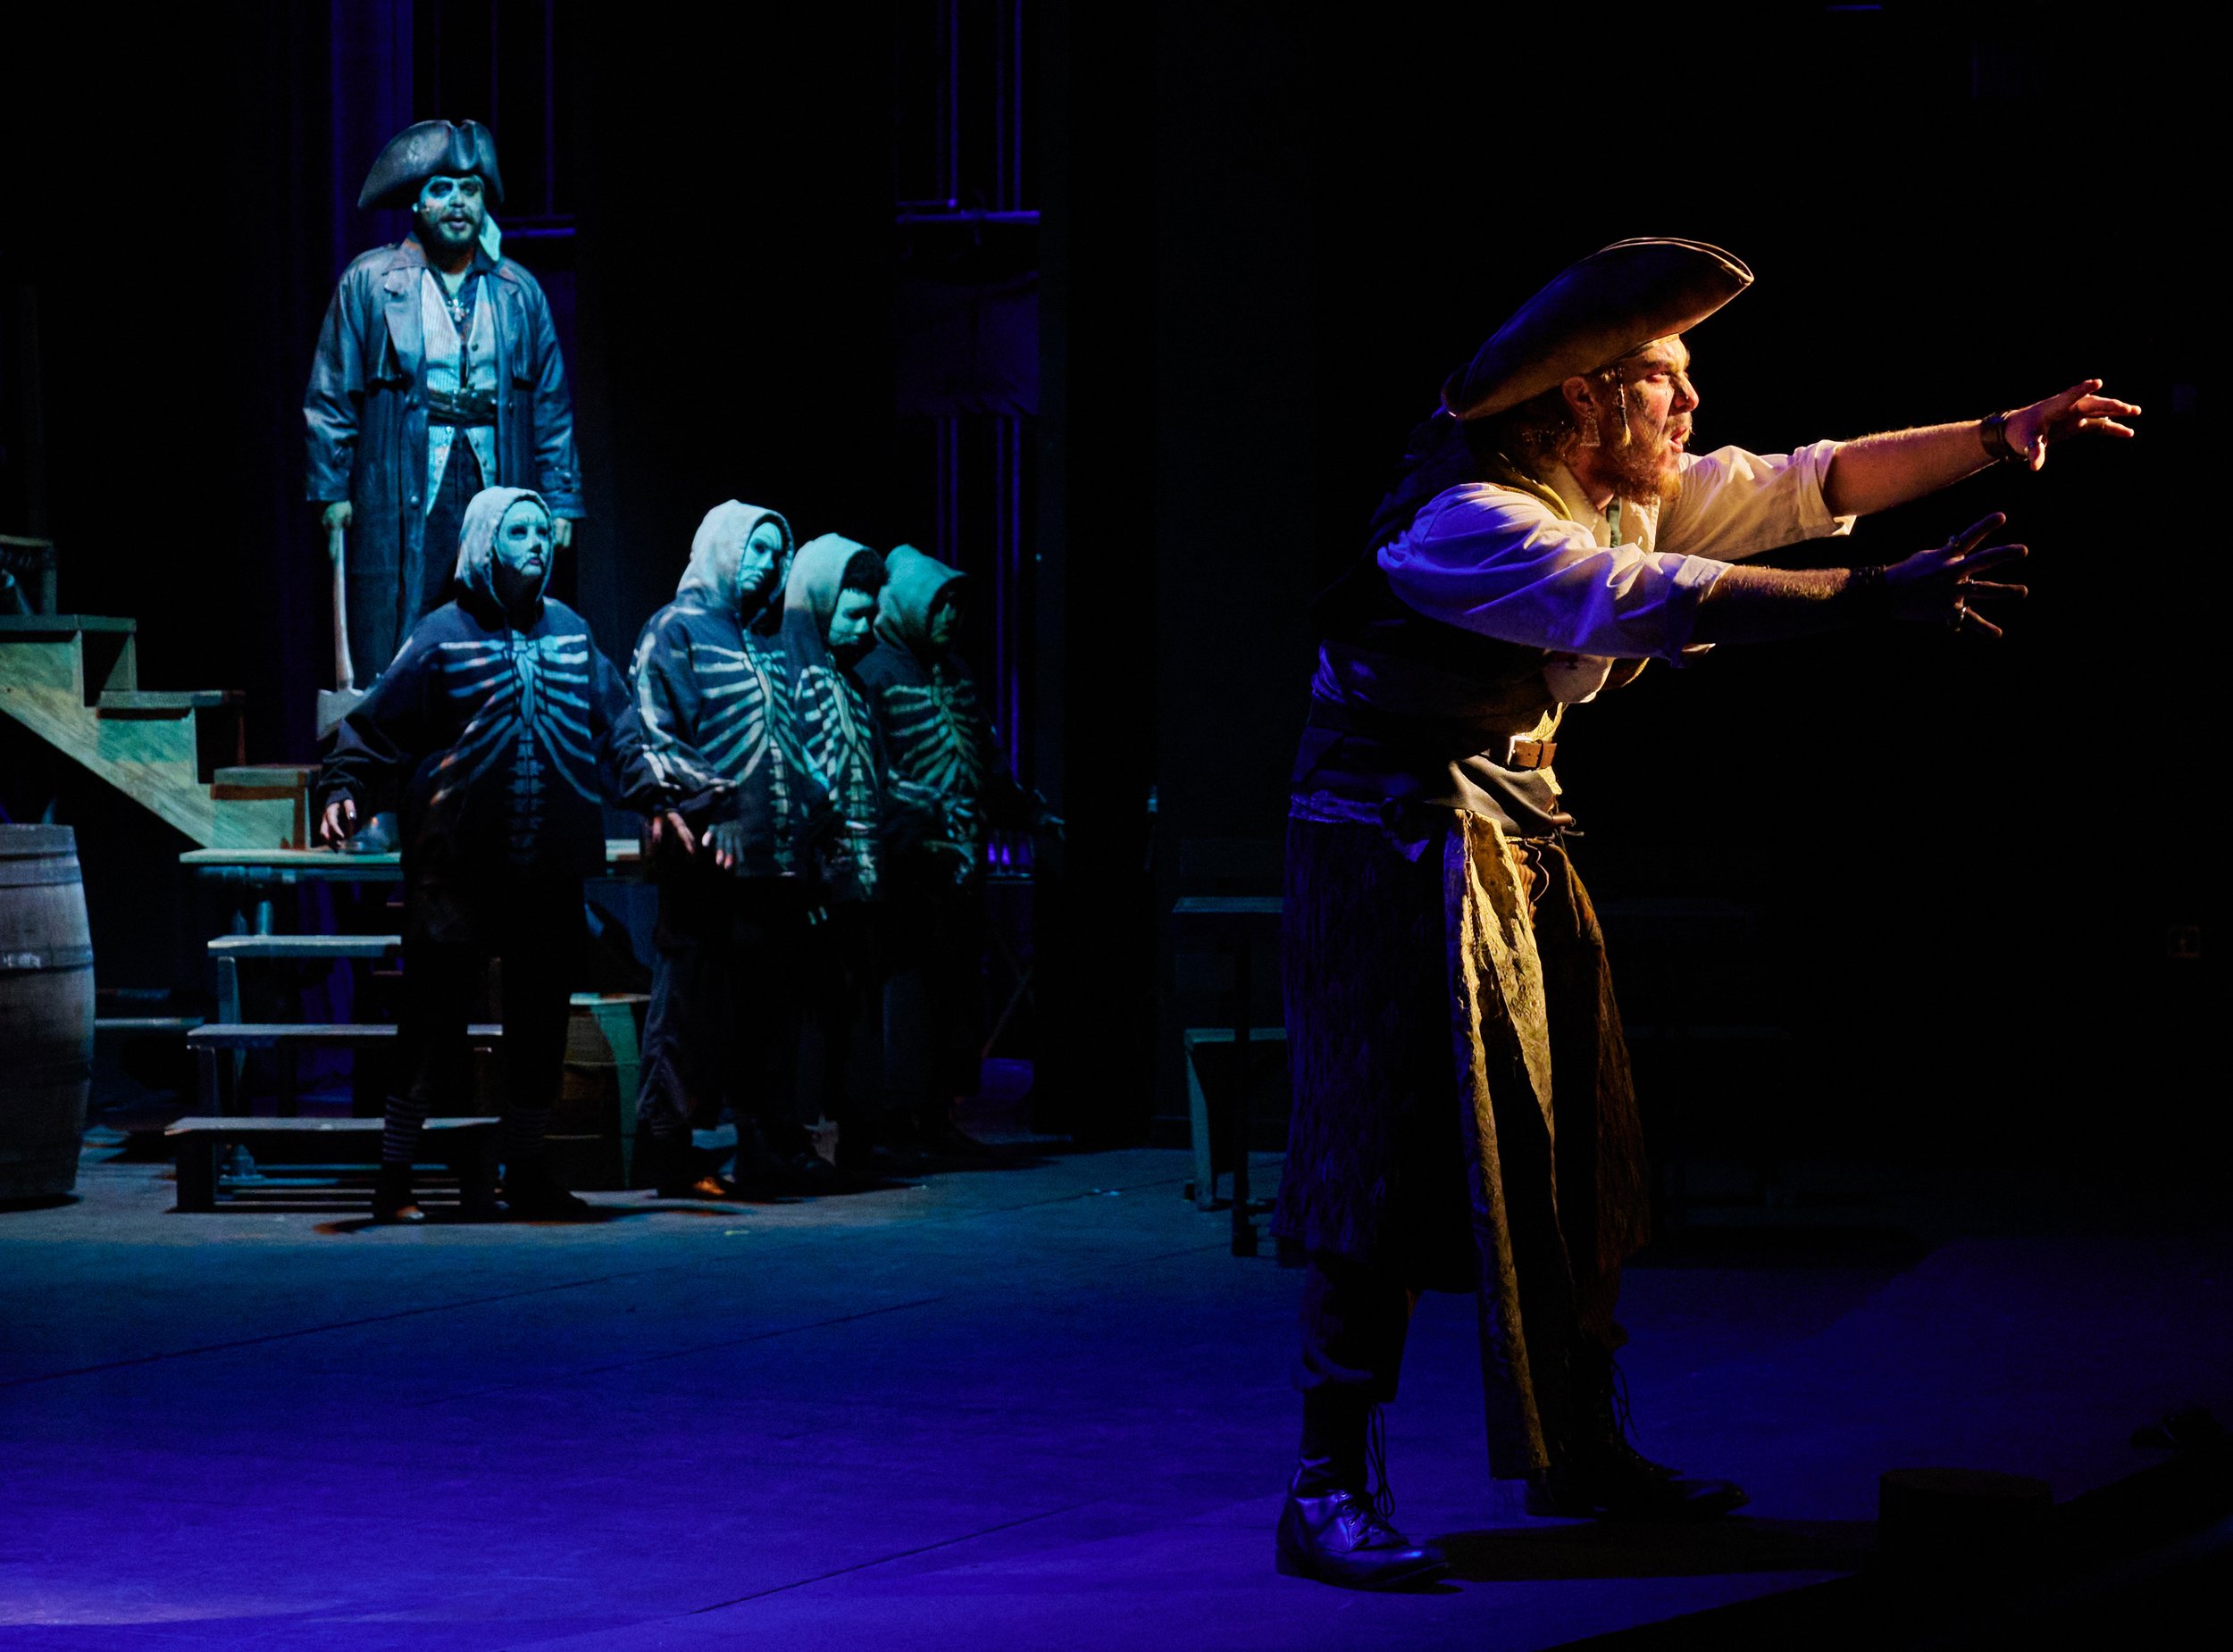  Abram Cervantes (left), Justin Valine (right), and cast during a performance of the Santa Monica College Theatre Arts production of "Treasure Island" at the SMC Main Stage on Sunday, May 22, 2022, in Santa Monica, Calif. (Nicholas McCall | The Corsa